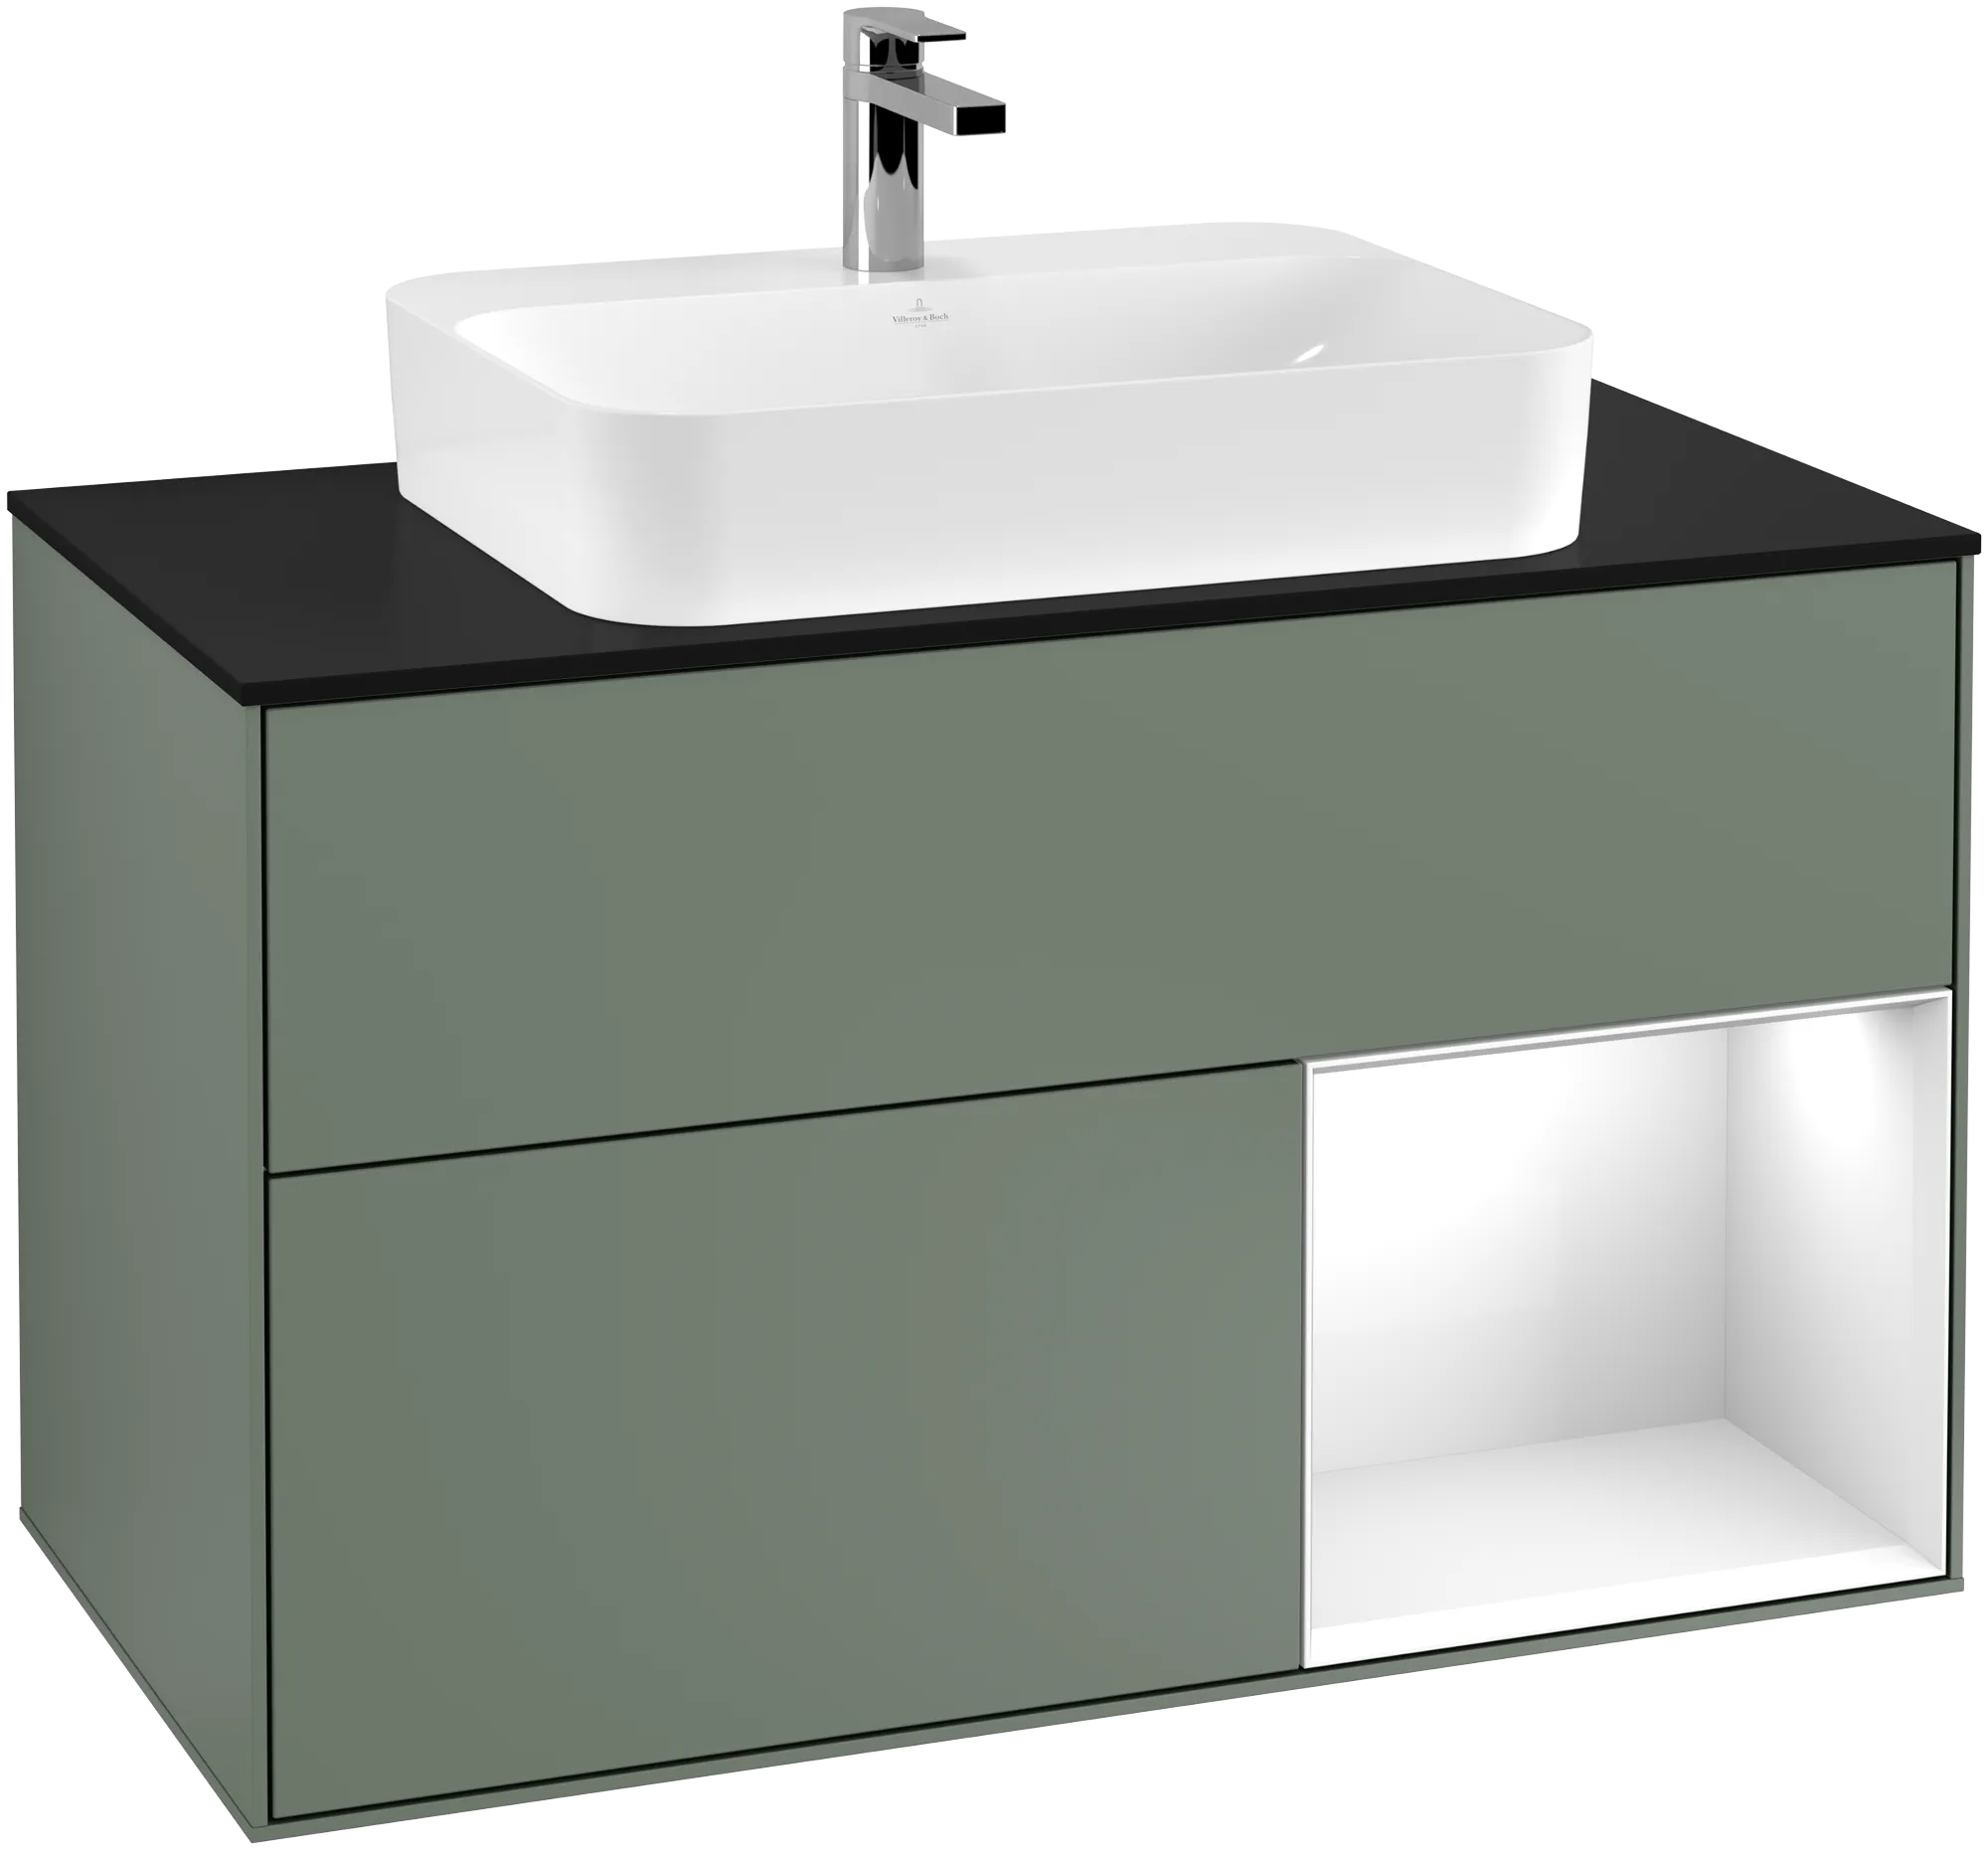 VILLEROY BOCH Finion Vanity unit, with lighting, 2 pull-out compartments, 1000 x 603 x 501 mm, Olive Matt Lacquer / Glossy White Lacquer / Glass Black Matt #G372GFGM resmi